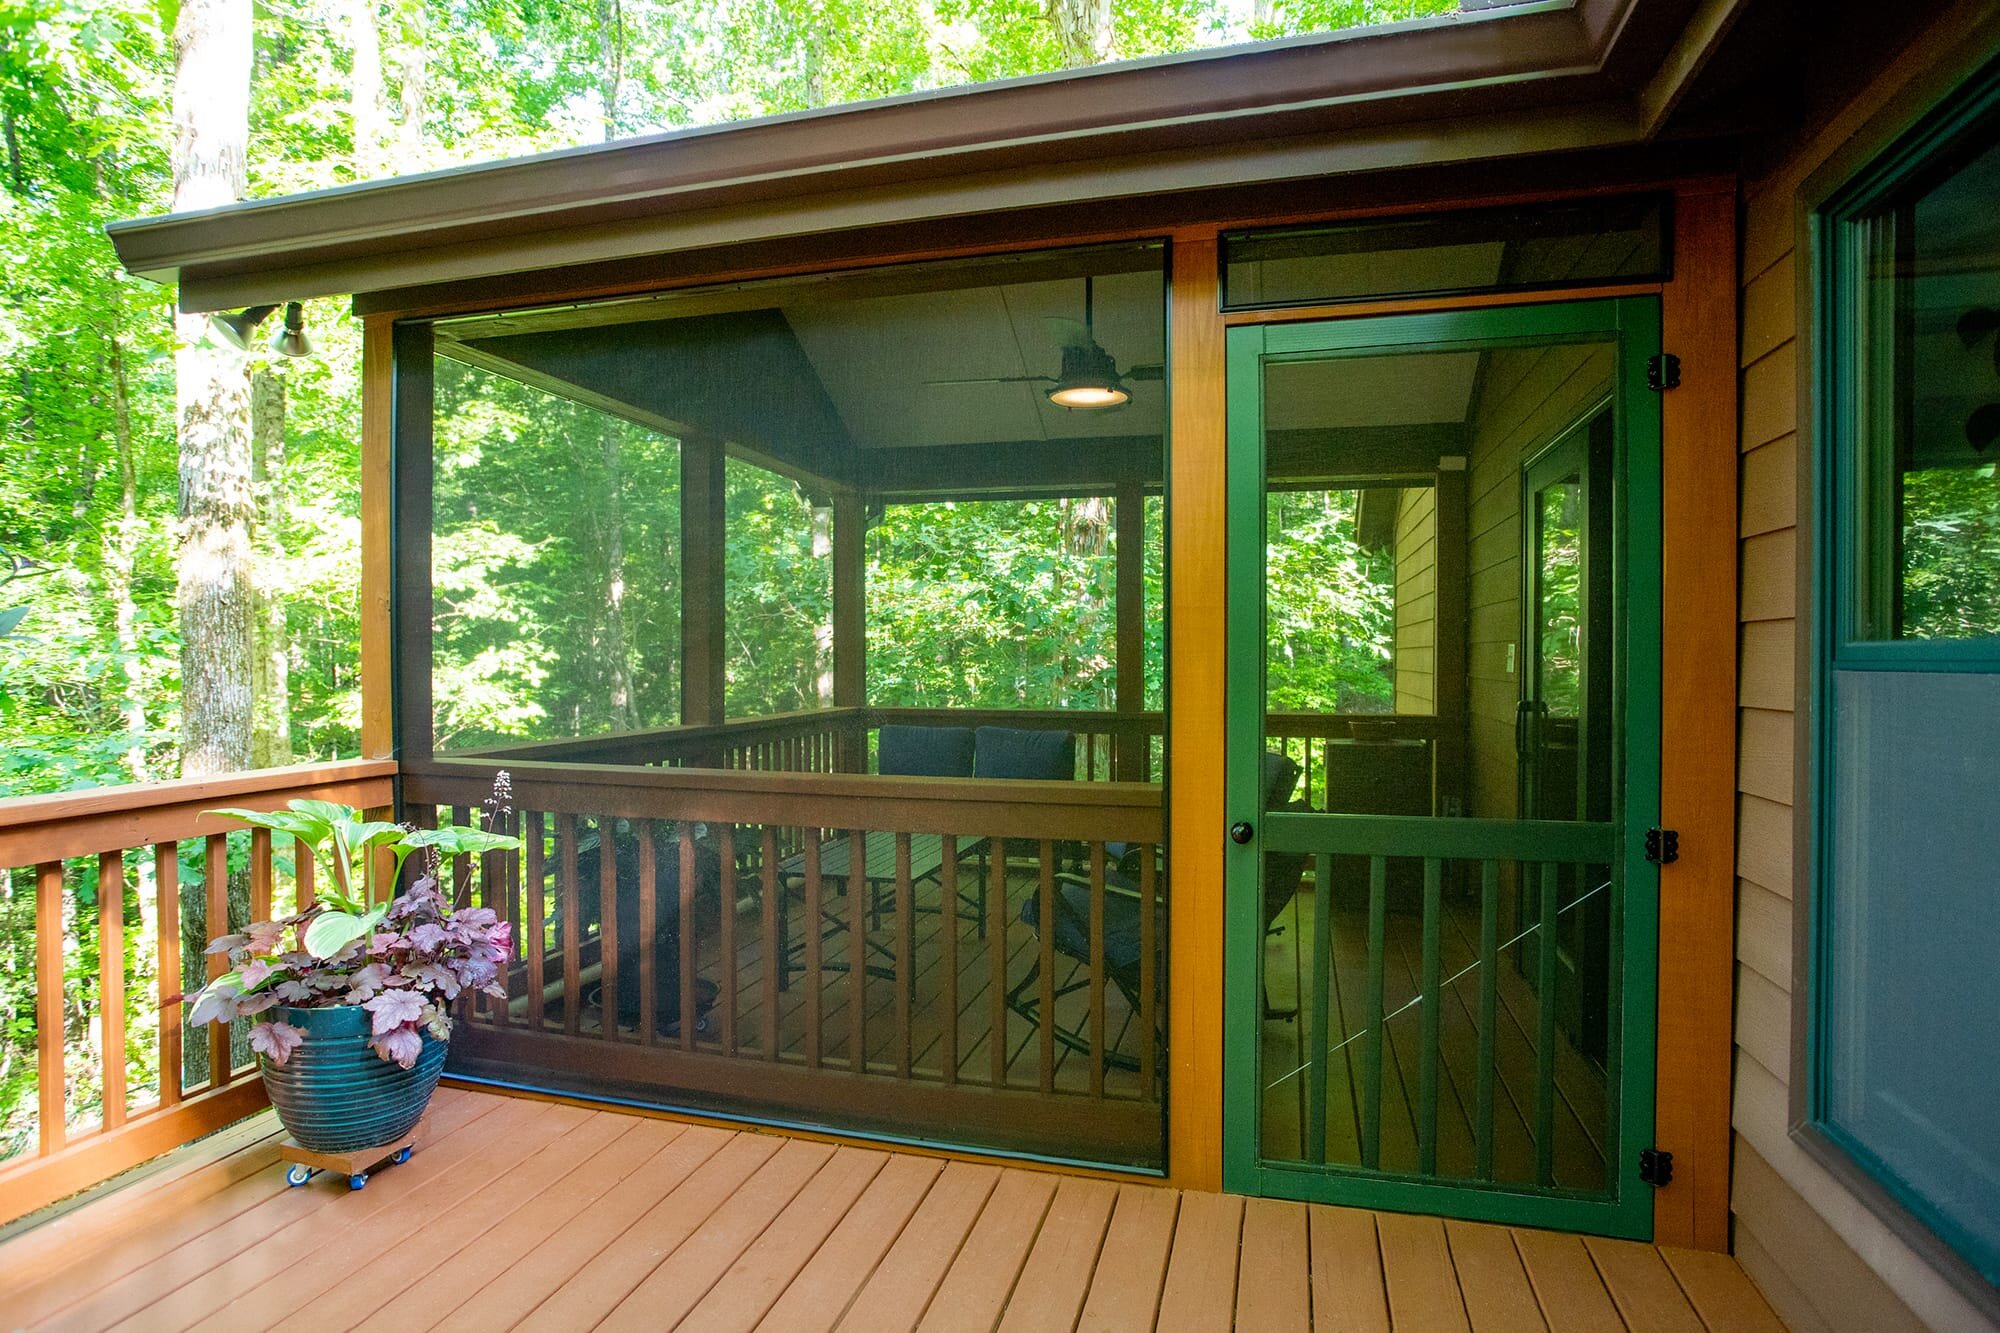 New Deck And Screened Porch Design